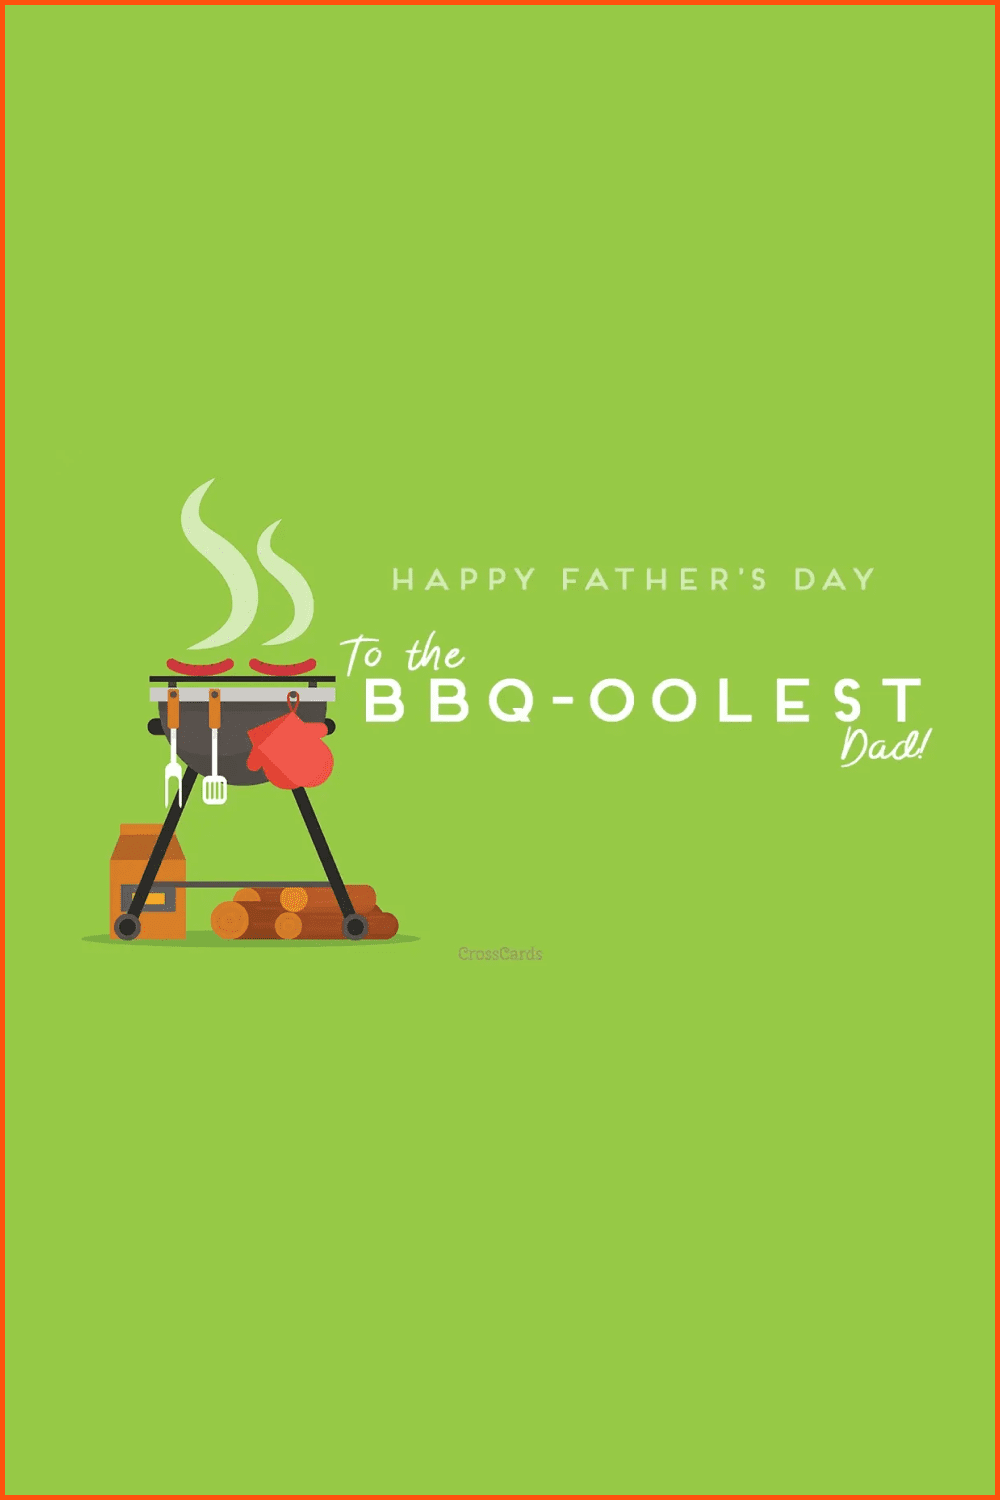 BBQ-oolest Dad from Crosscards.